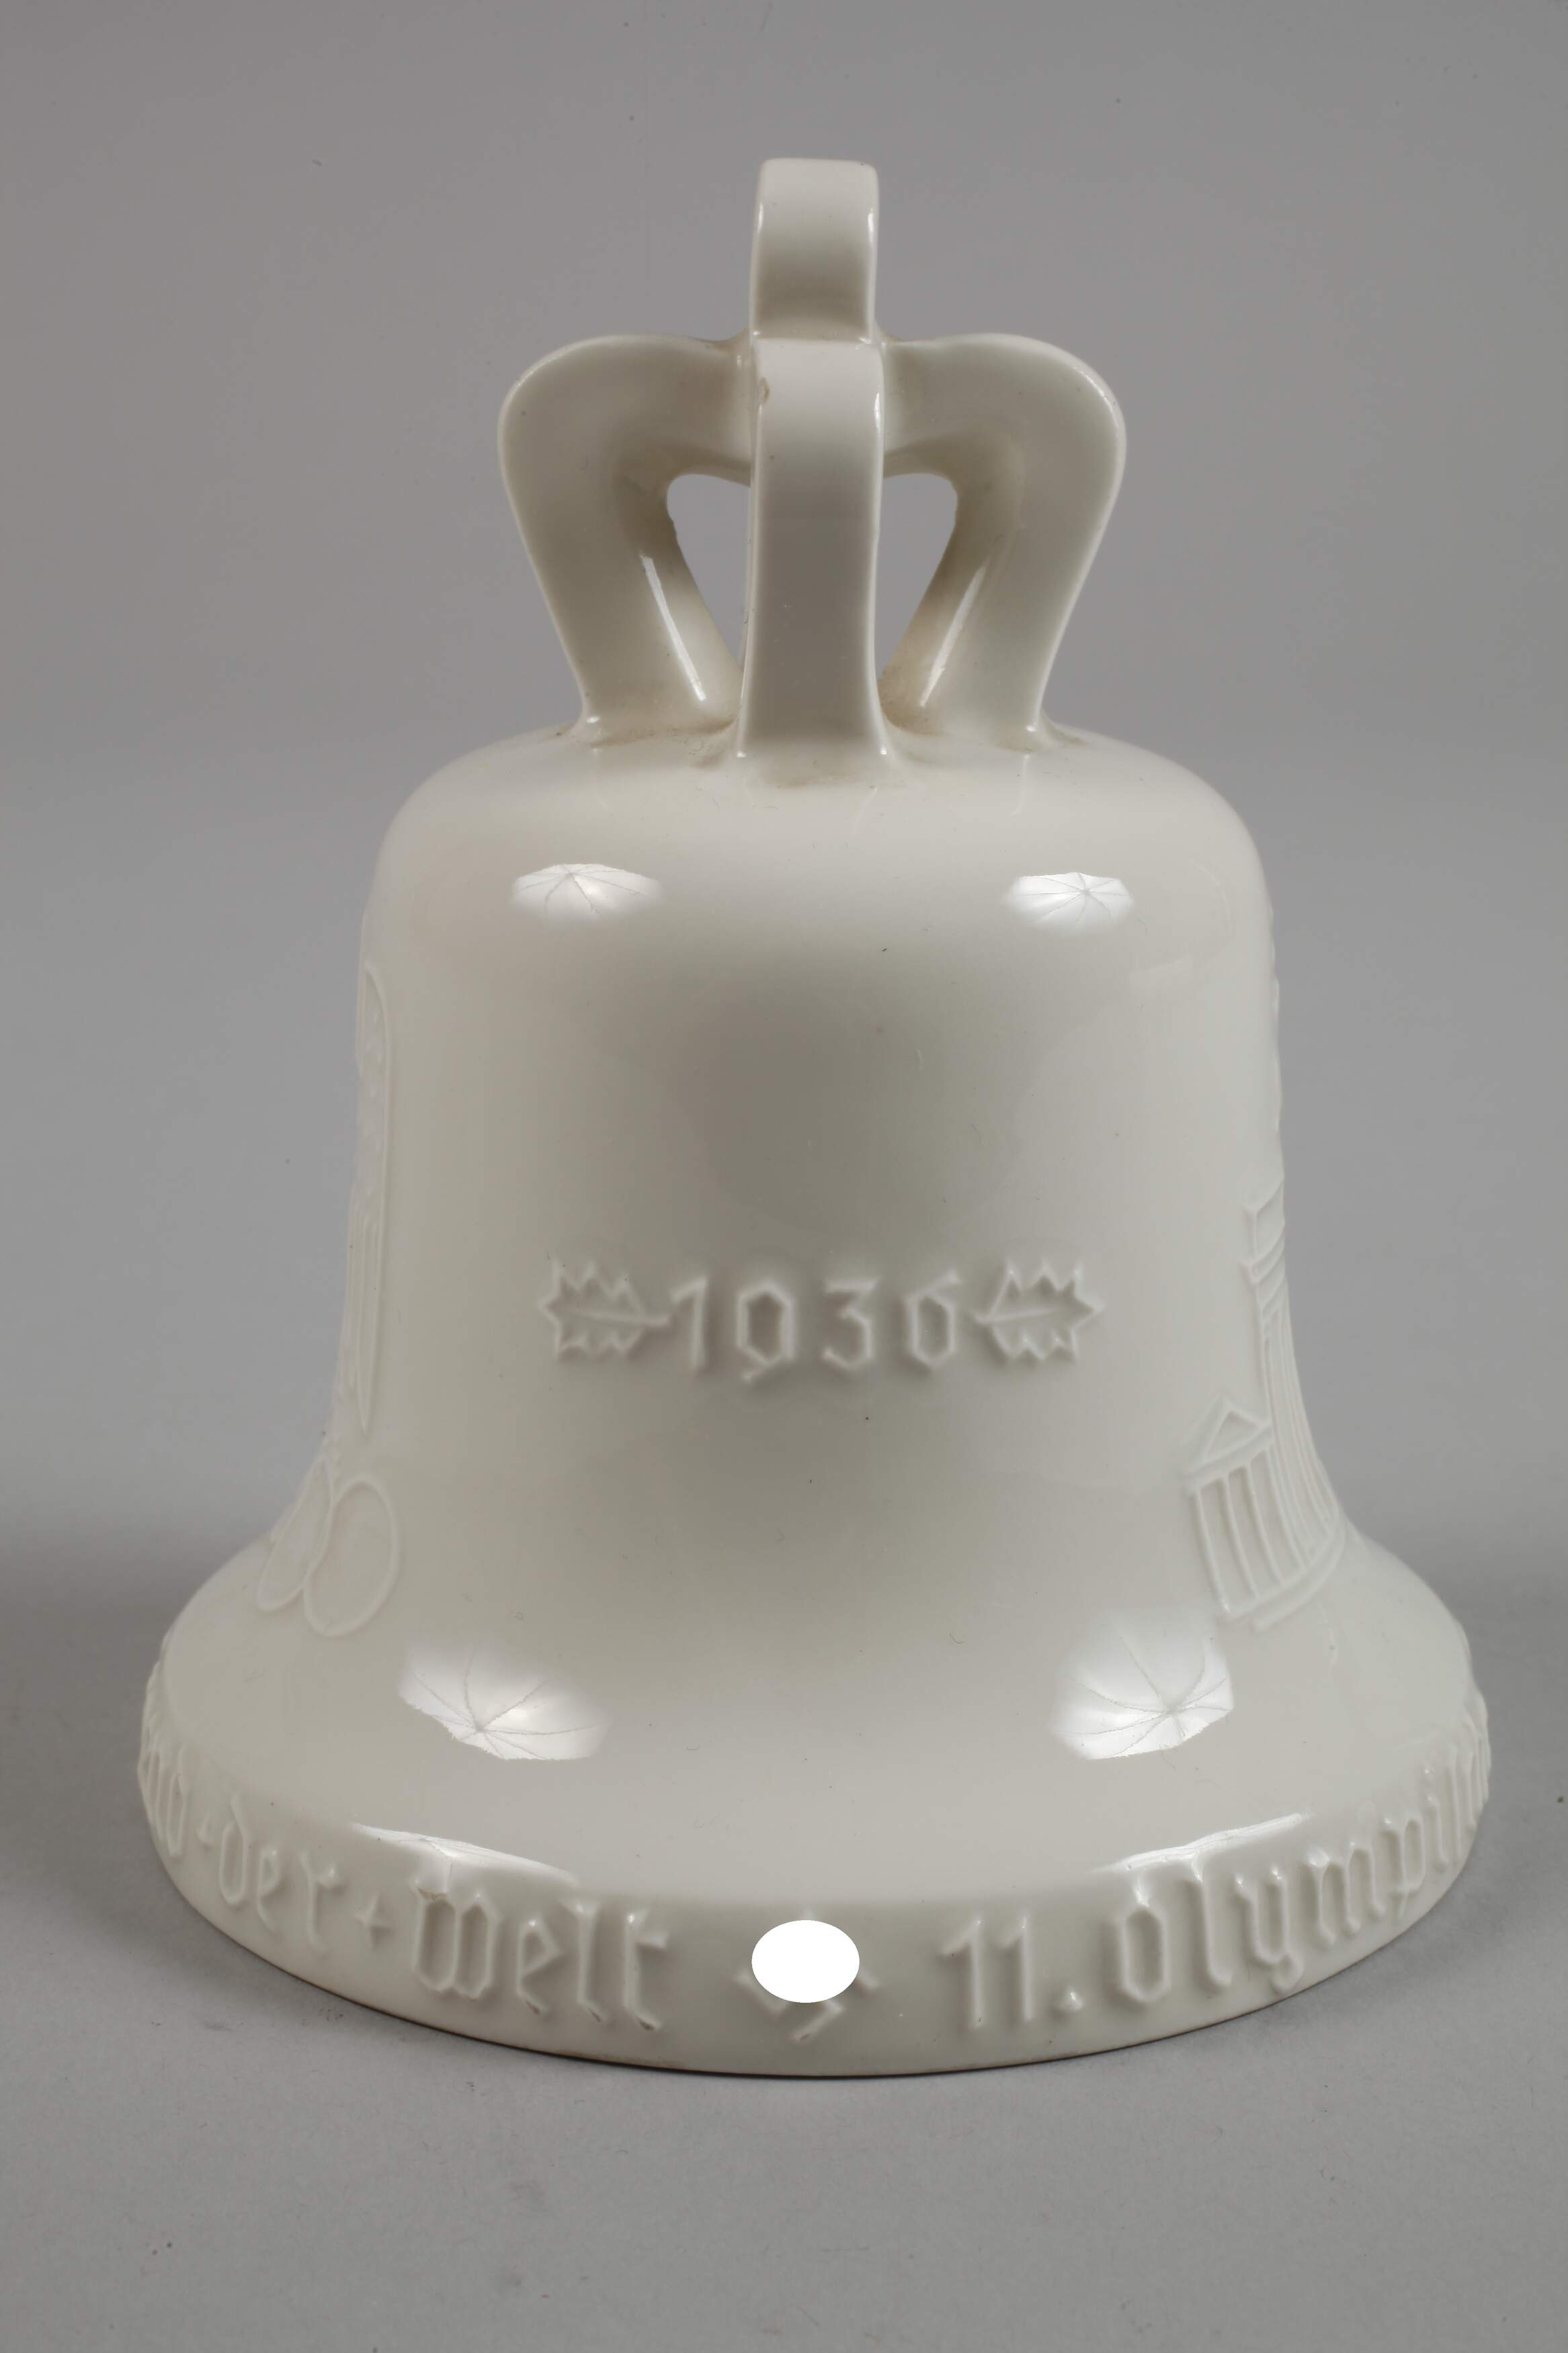 Porcelain bell Olympia 1936 - Image 2 of 5